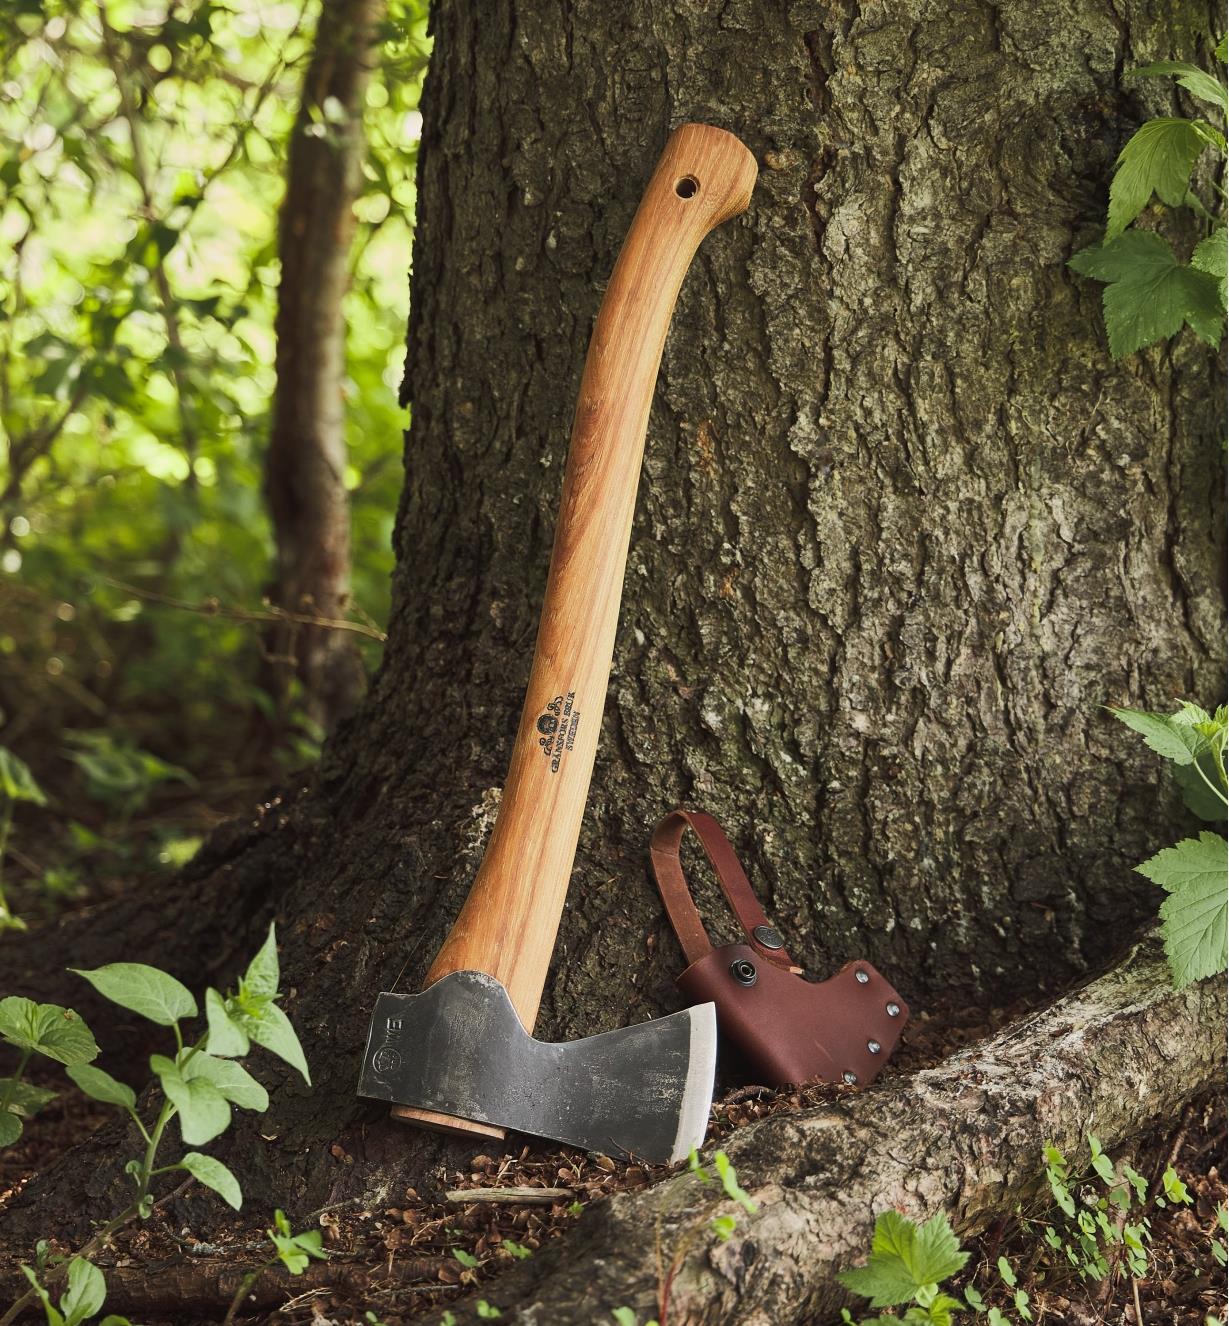 A Gränsfors small forest axe leaning against the trunk of a tree, next to its leather case